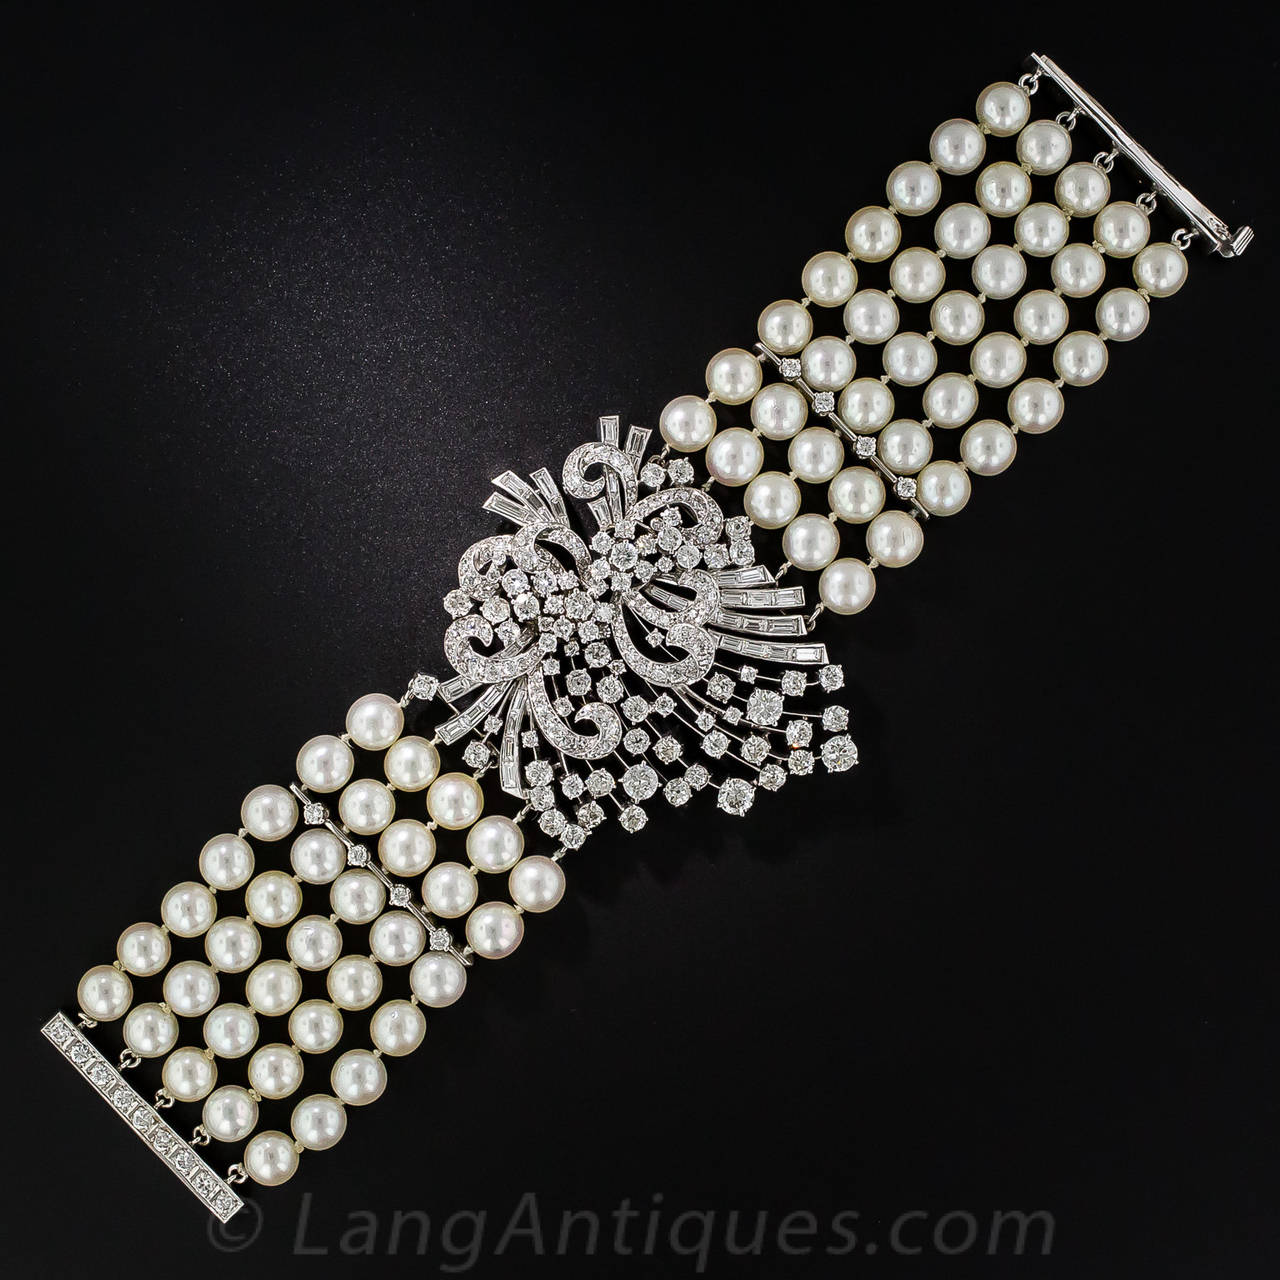 A dazzling fireworks display of super sparkling, bright-white, high-quality, round full-cut and baguette diamonds - totaling 14.50 carats - explodes in the center of this stunning and extravagantly glamorous 5-strand pearl bracelet, dating from the